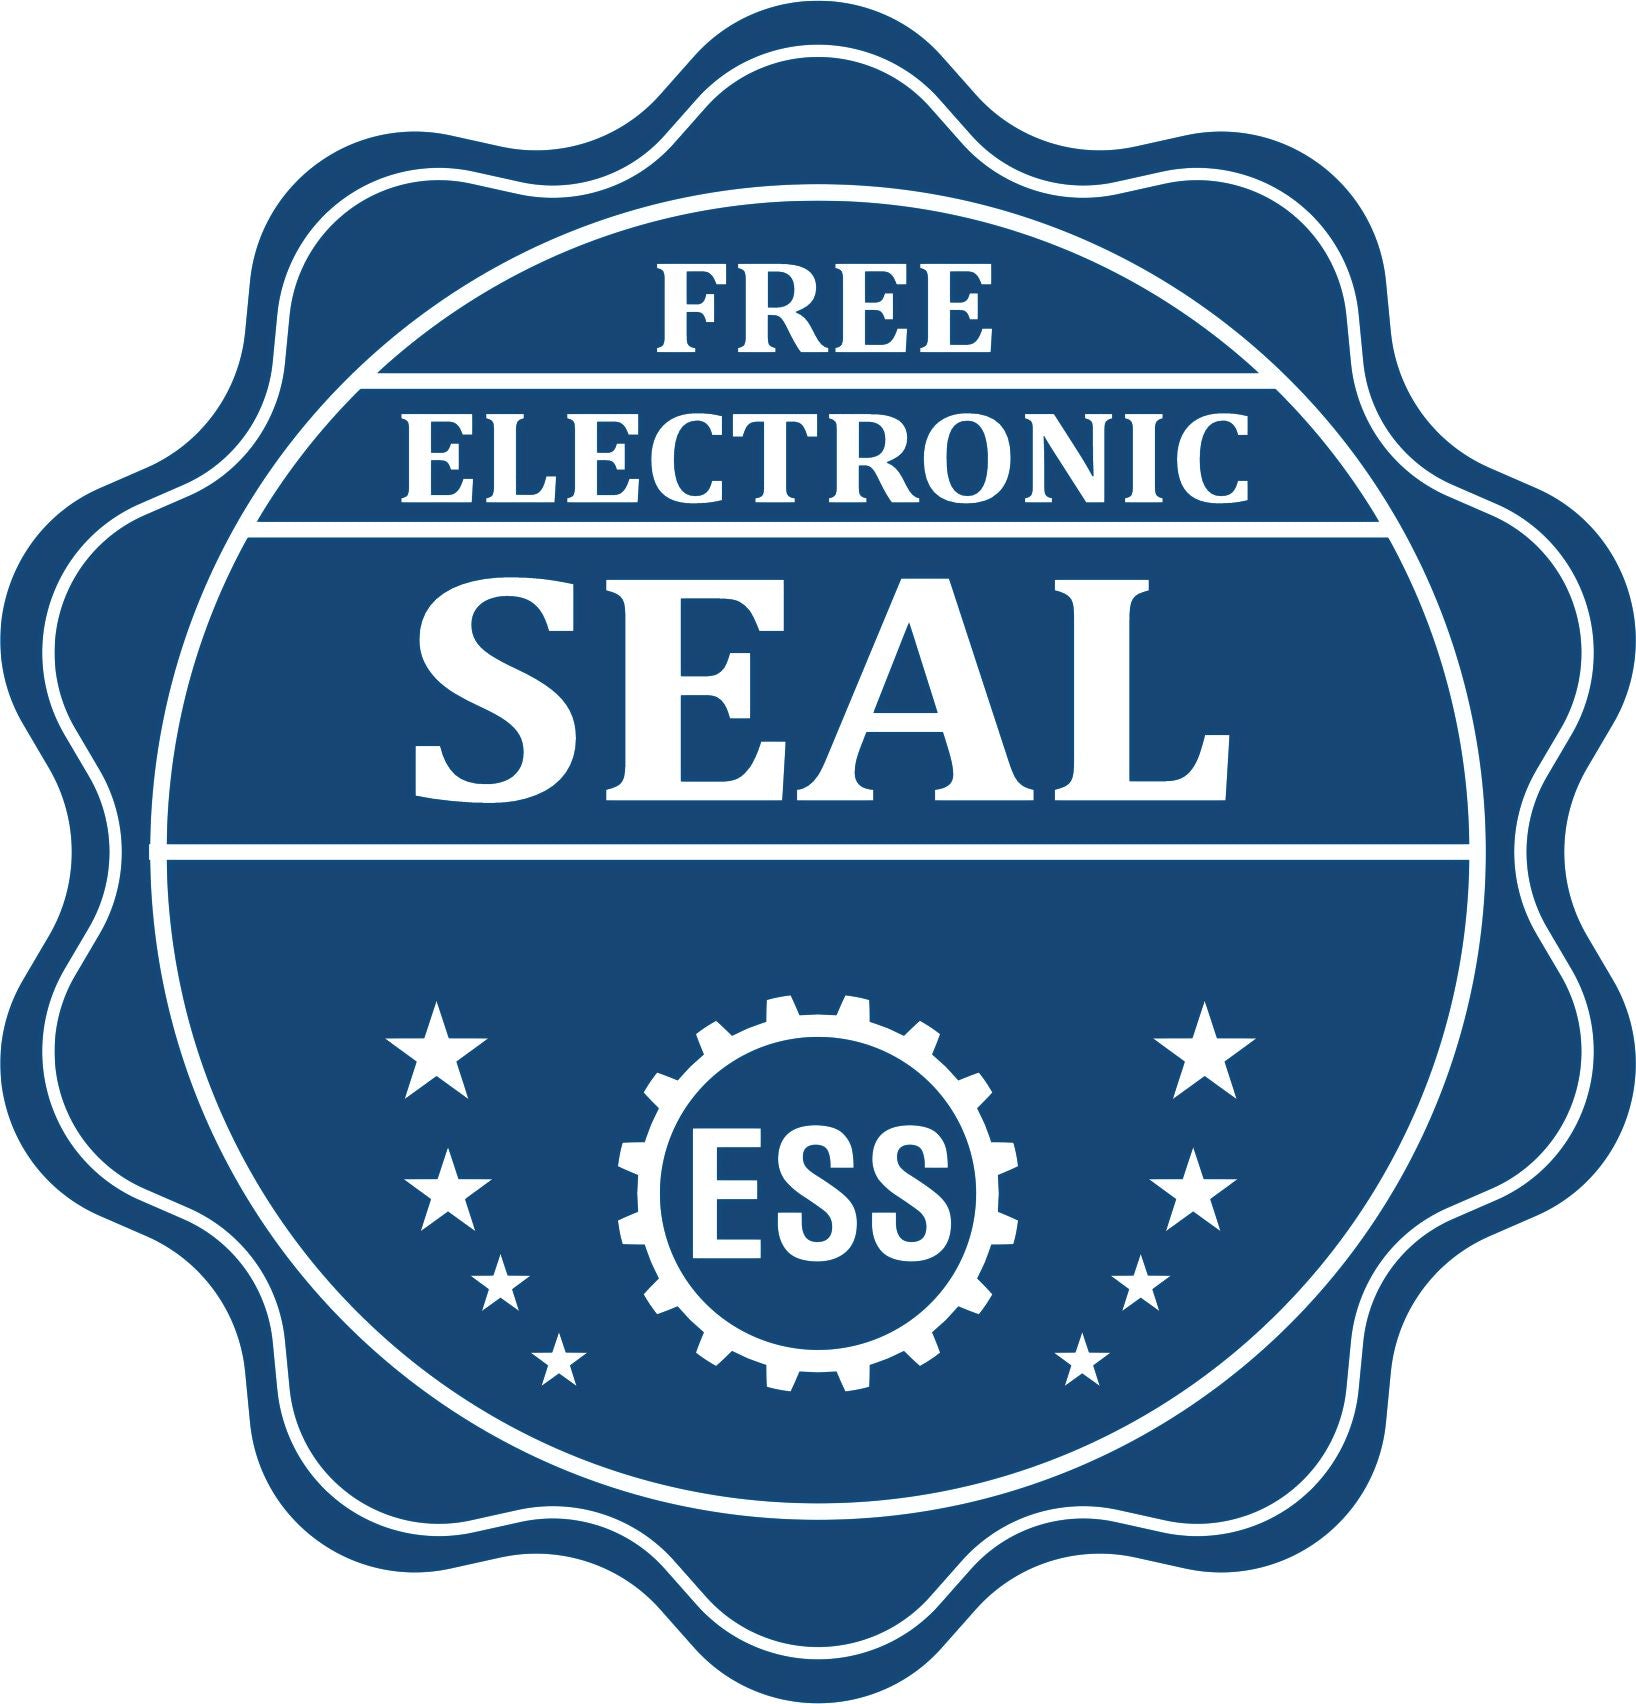 A badge showing a free electronic seal for the Hybrid Florida Geologist Seal with stars and the ESS gear on the emblem.